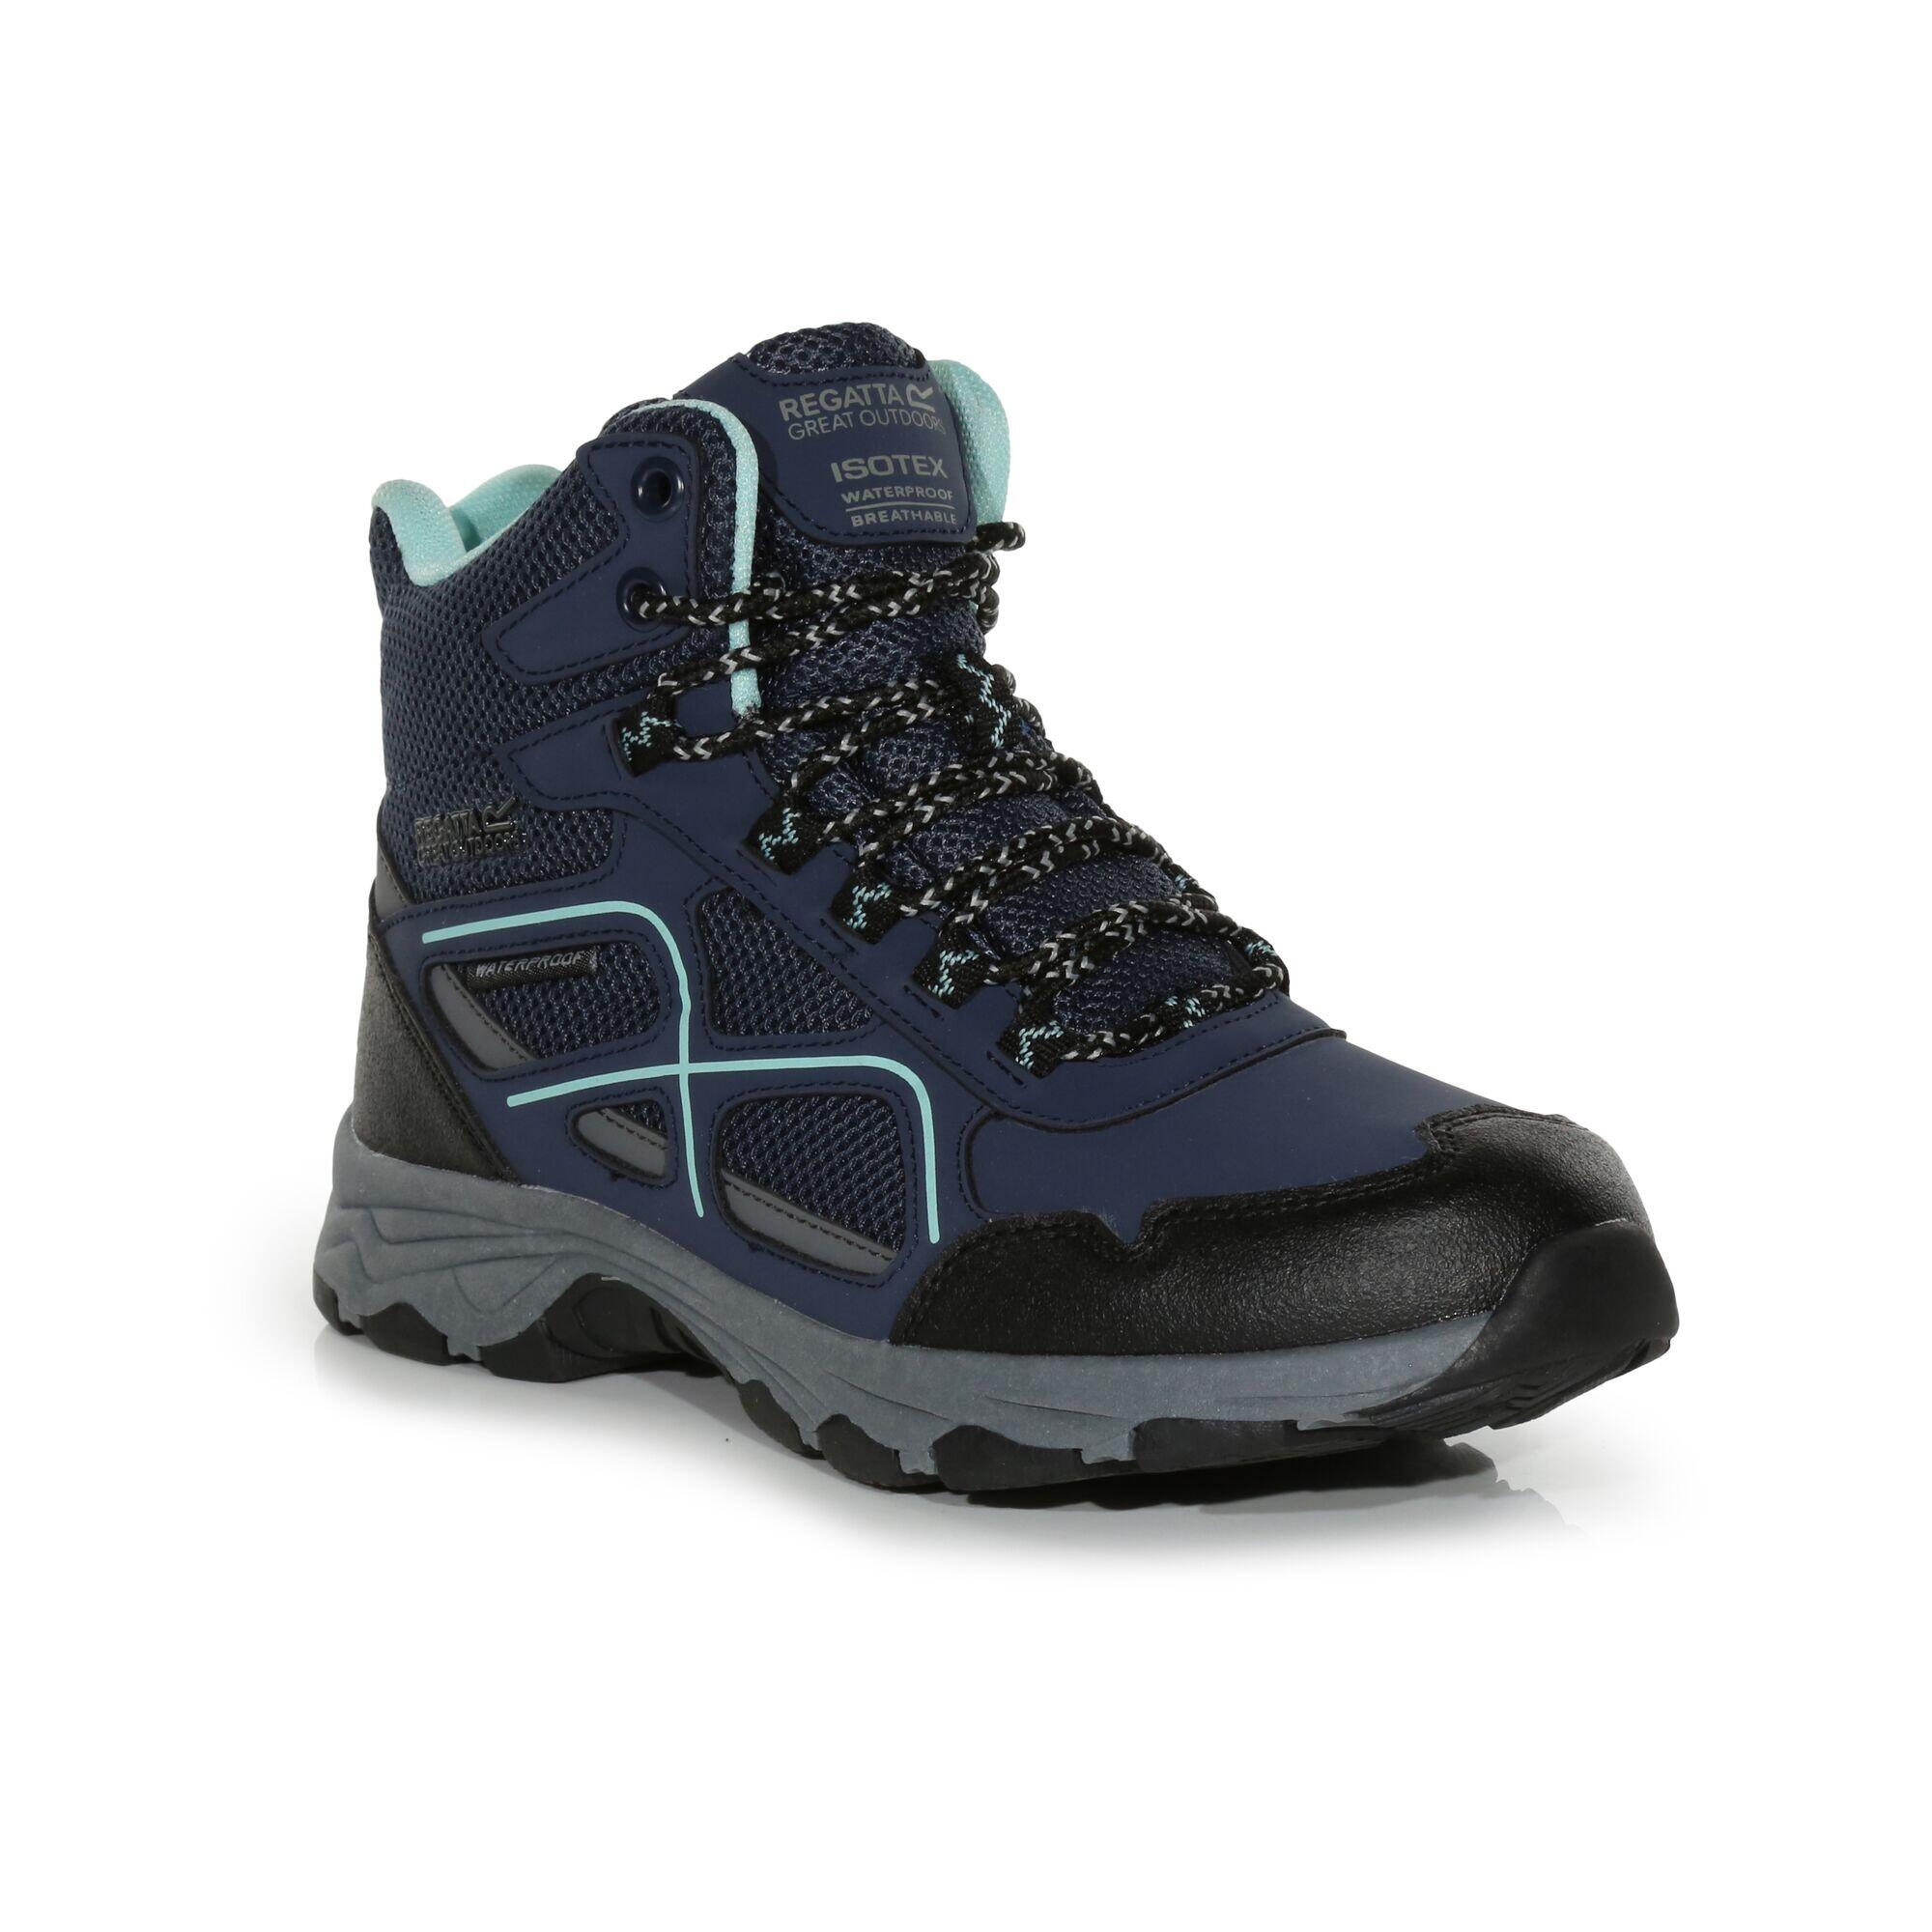 Lady Vendeavour Women's Mid Hiking Boots 2/6